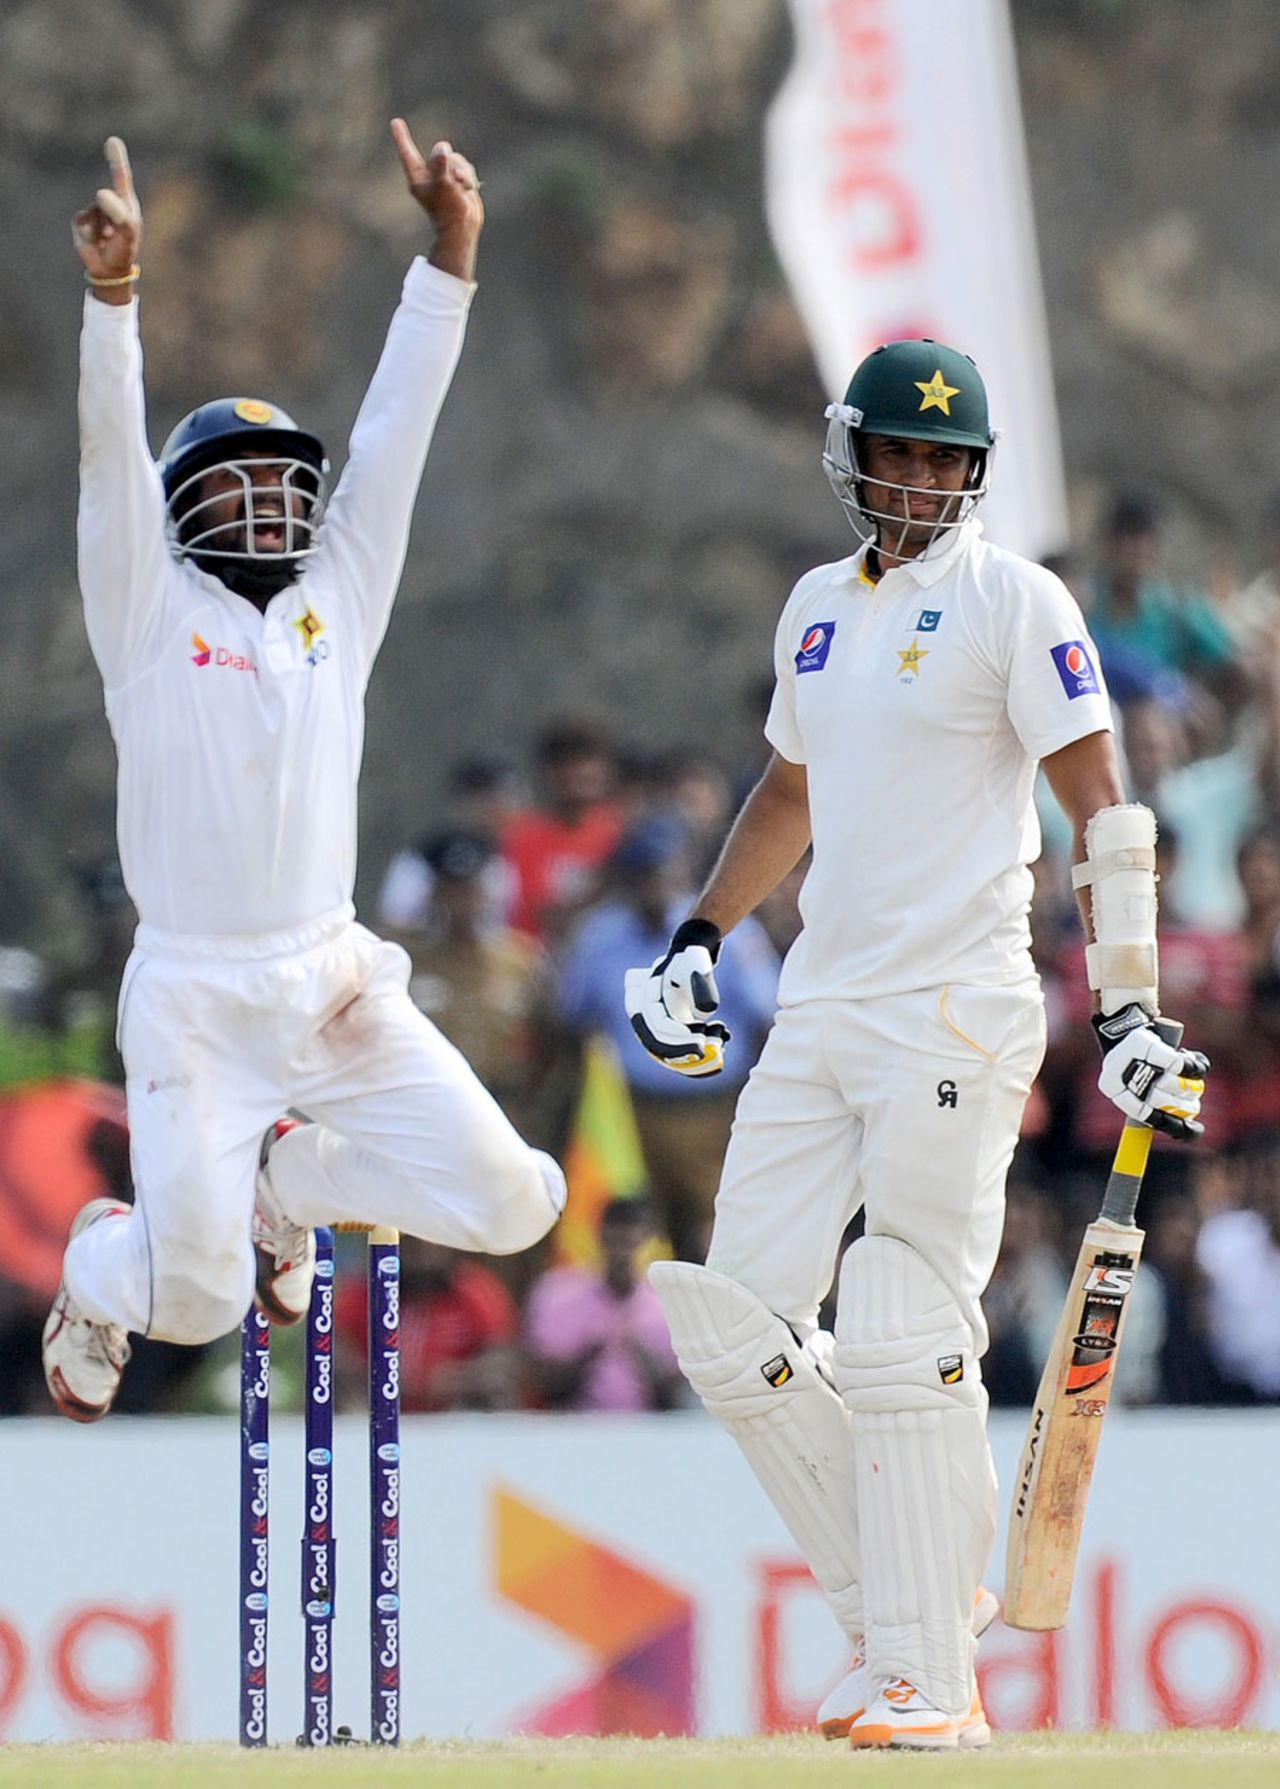 Kaushal Silva leaps in joy after the wicket of Mohammad Talha, Sri Lanka v Pakistan, 1st Test, Galle, 5th day, August 10, 2014